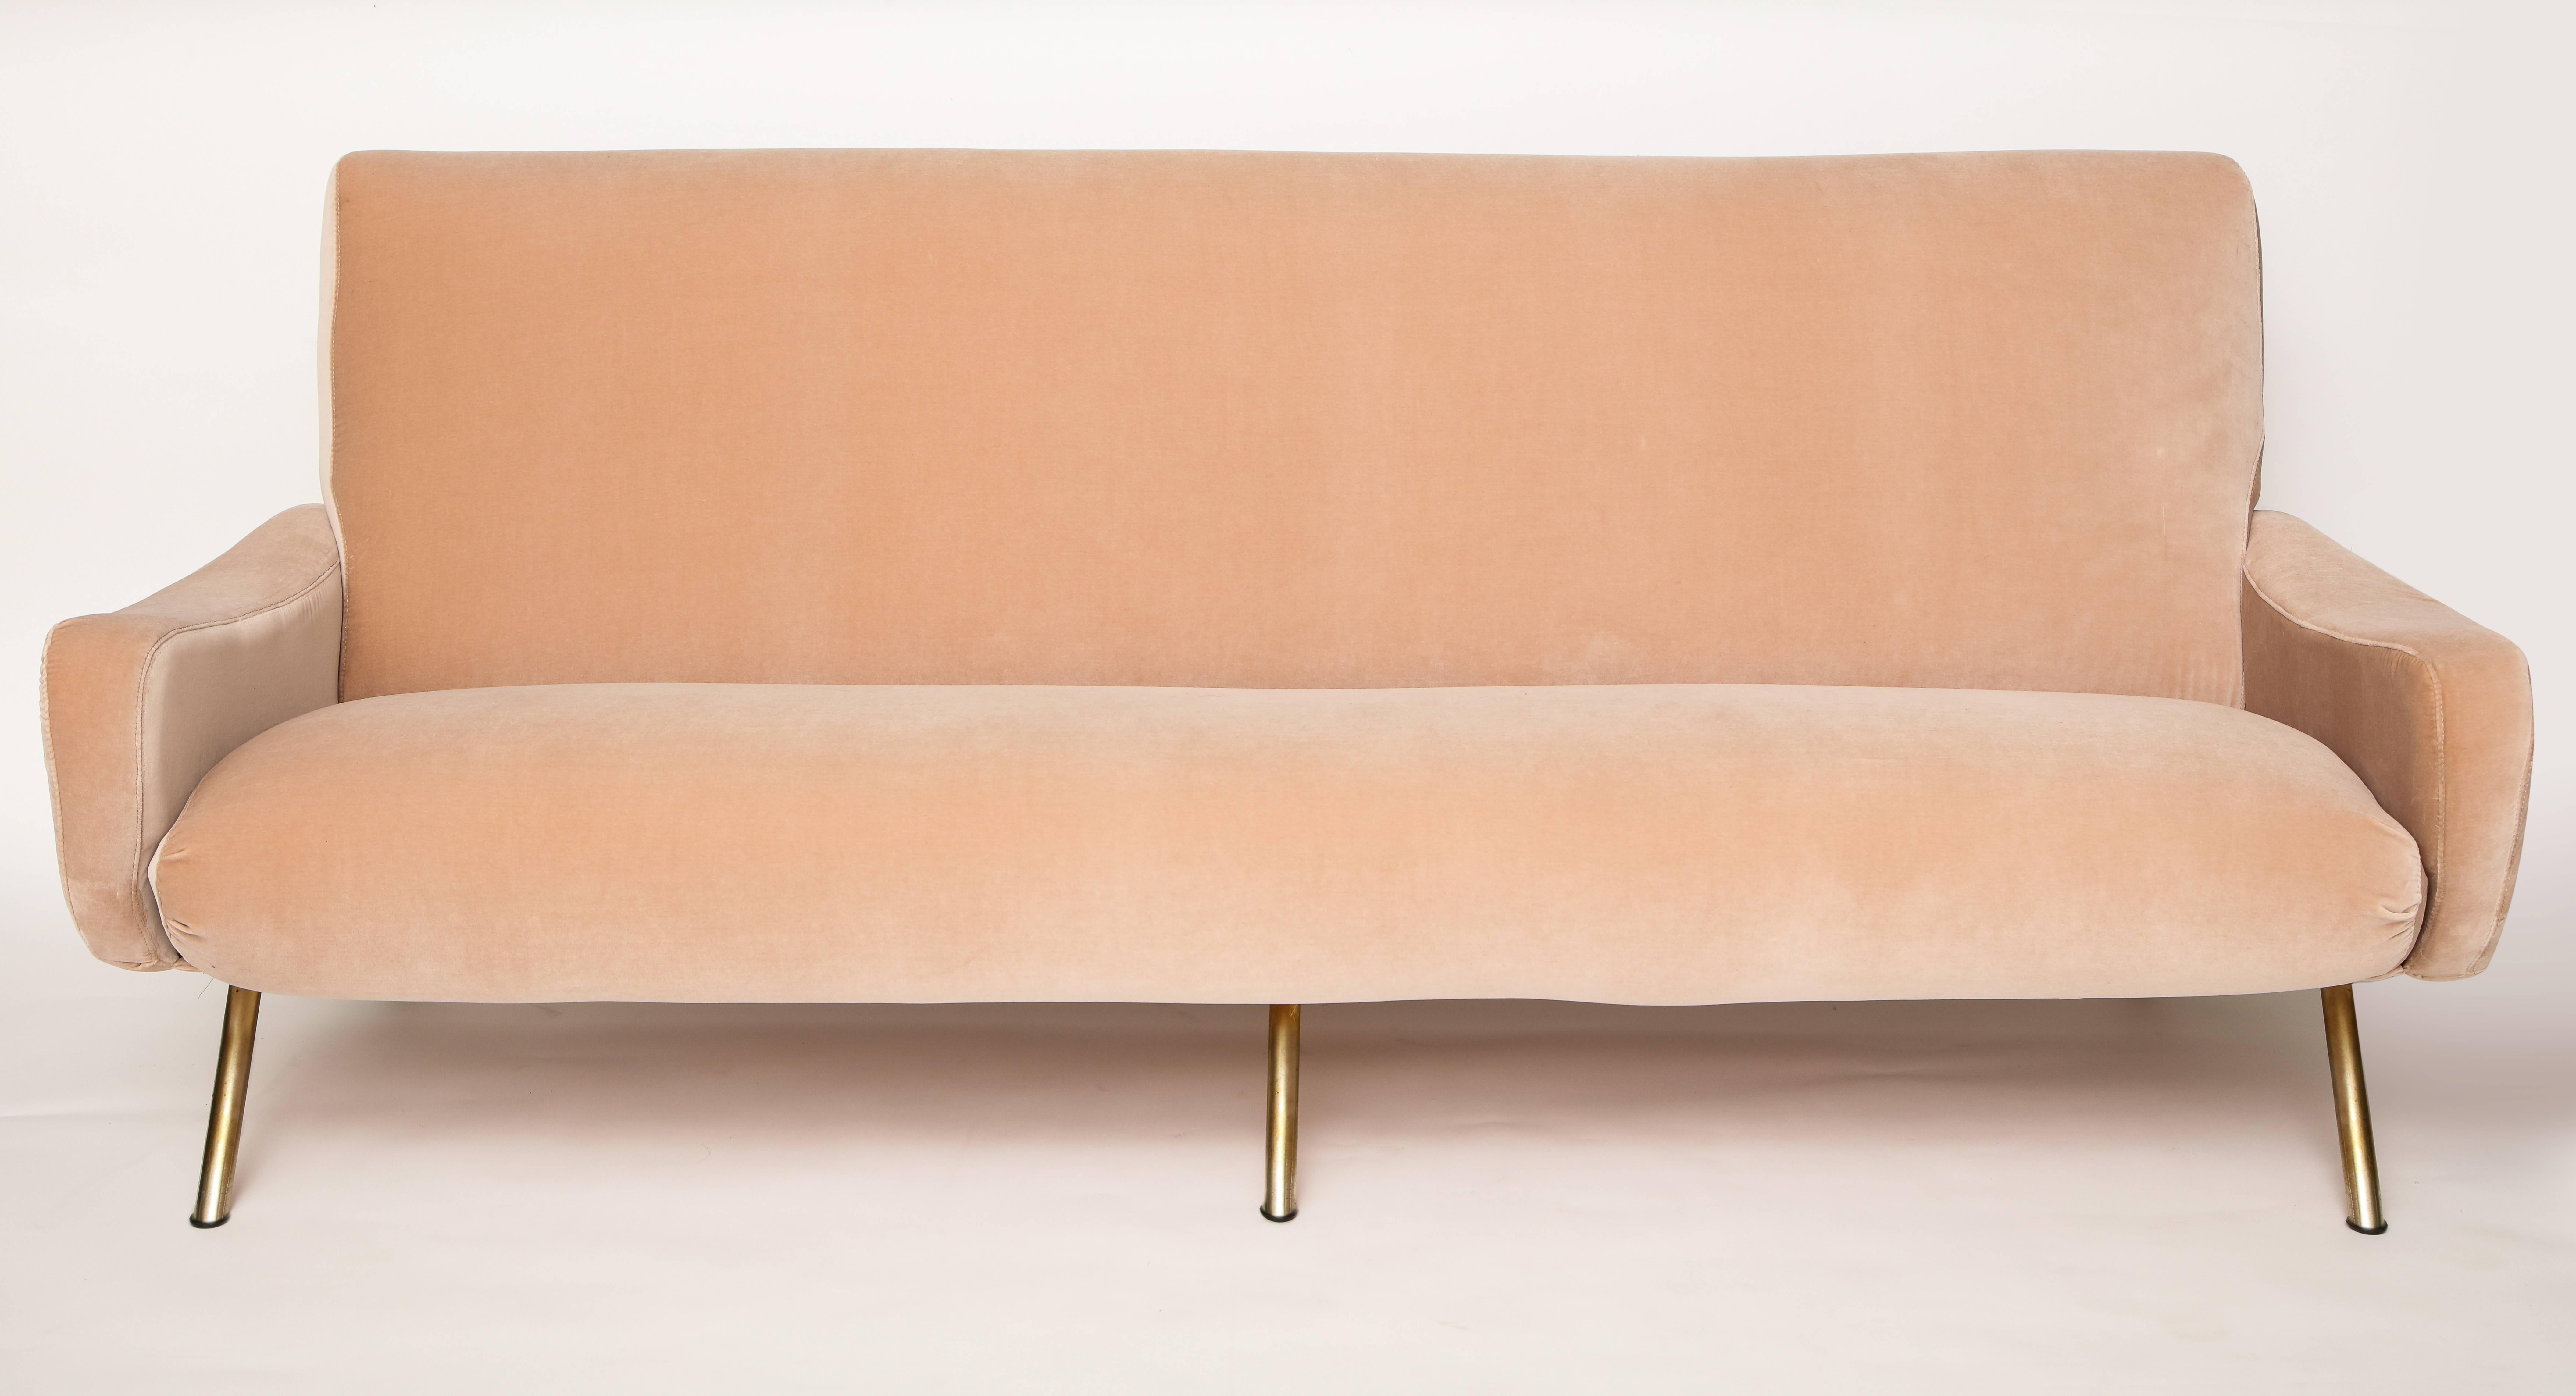 Marco Zanuso lady sofa pink beige velvet, Mid-Century, 1950s, Italy

Newly recovered Marco Zanuso Lady Sofa, in a light buttery beige pink velvet.
Very comfortable and rare.

Measures: Width: 81 inches
Height: 32 inches
Depth: 30 inches
Seat